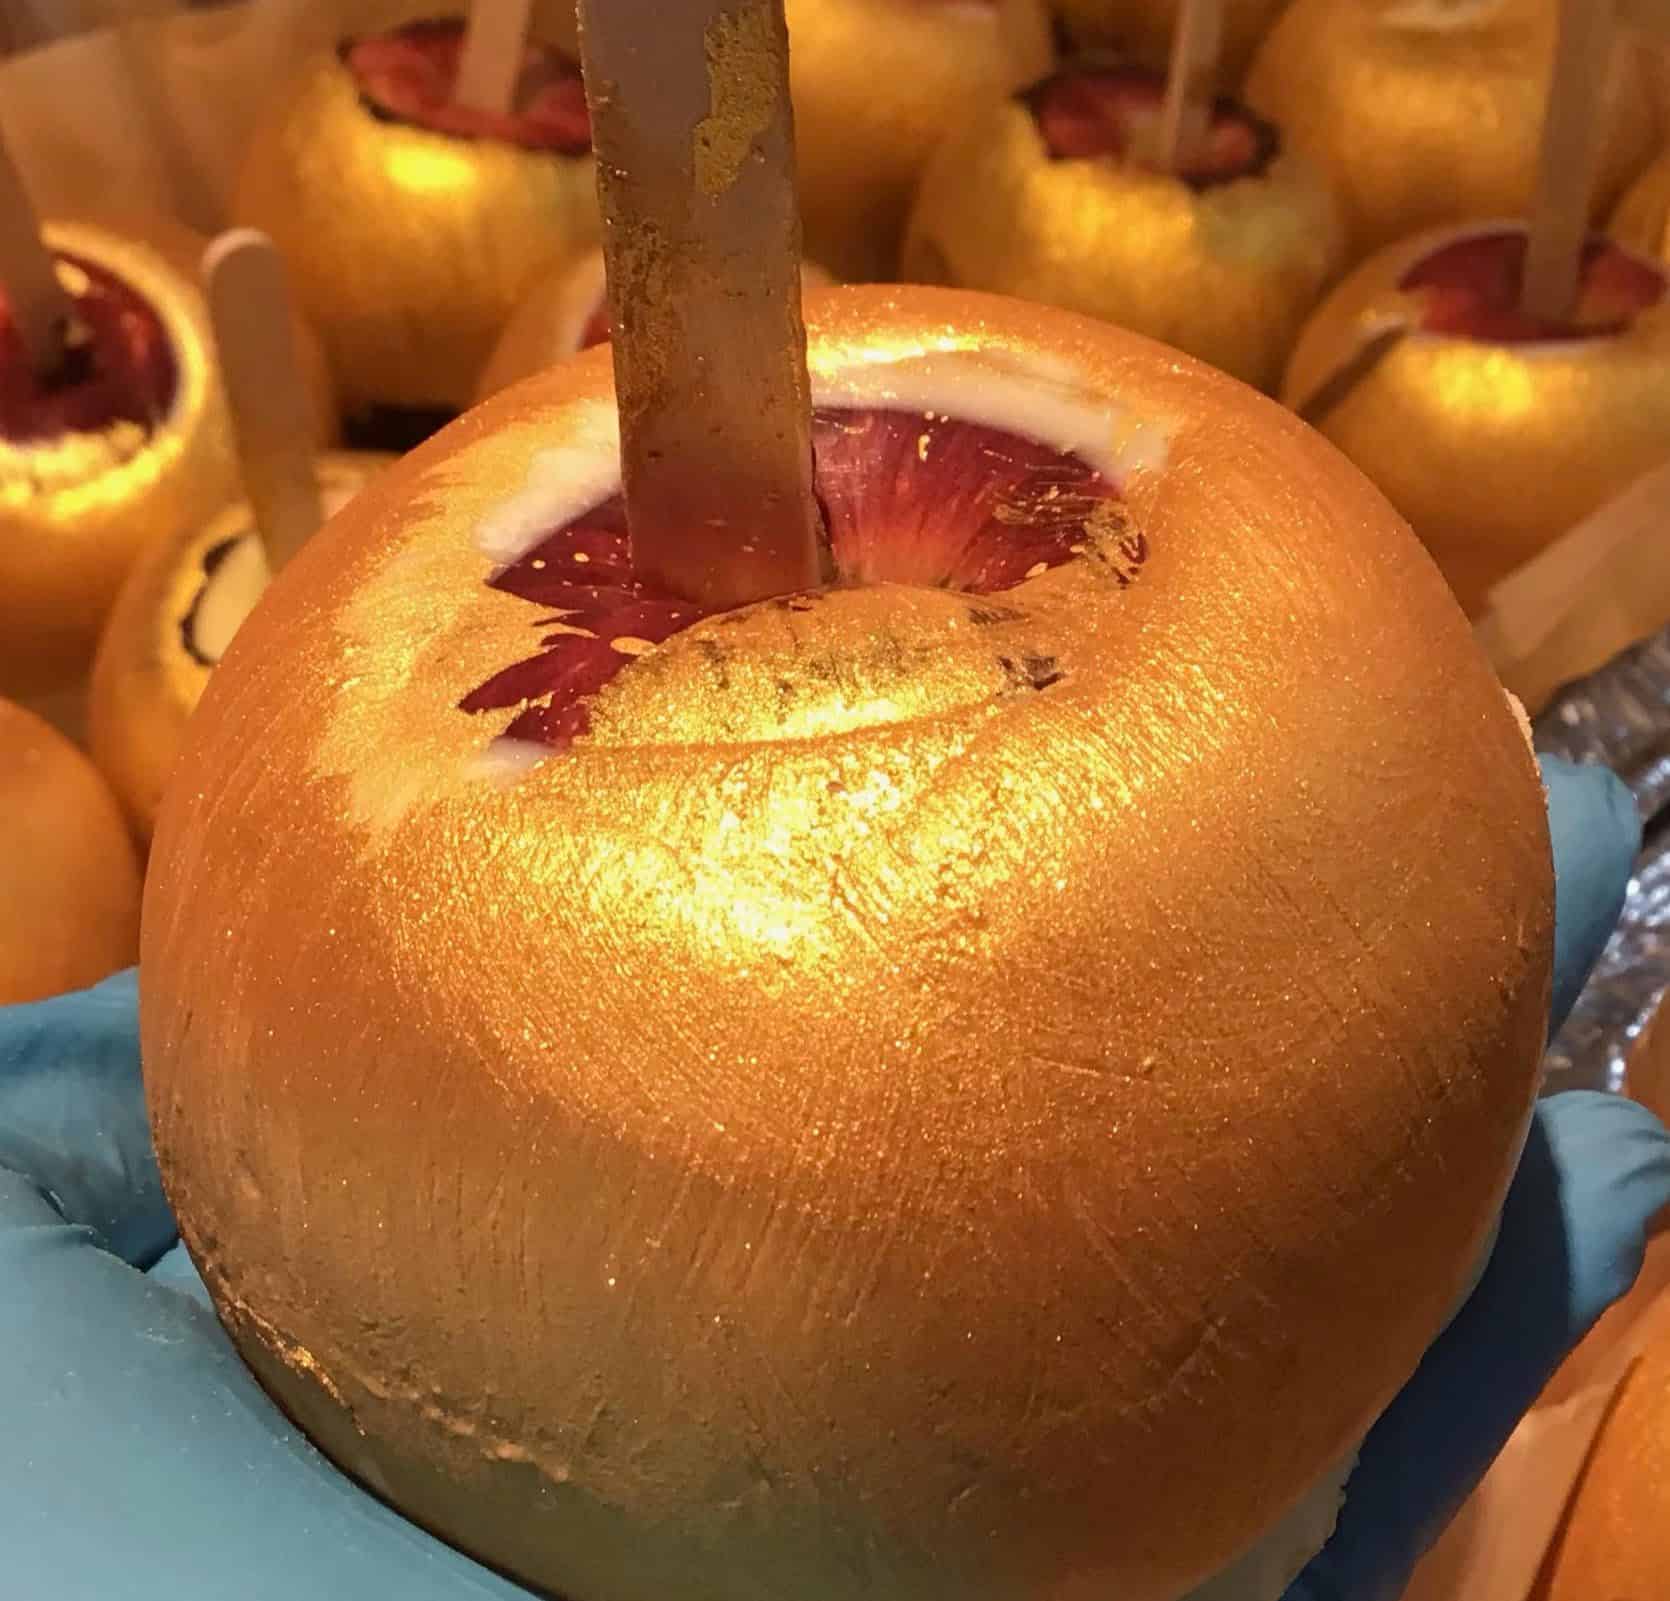 Golden edible apple with popsicle stick skewer